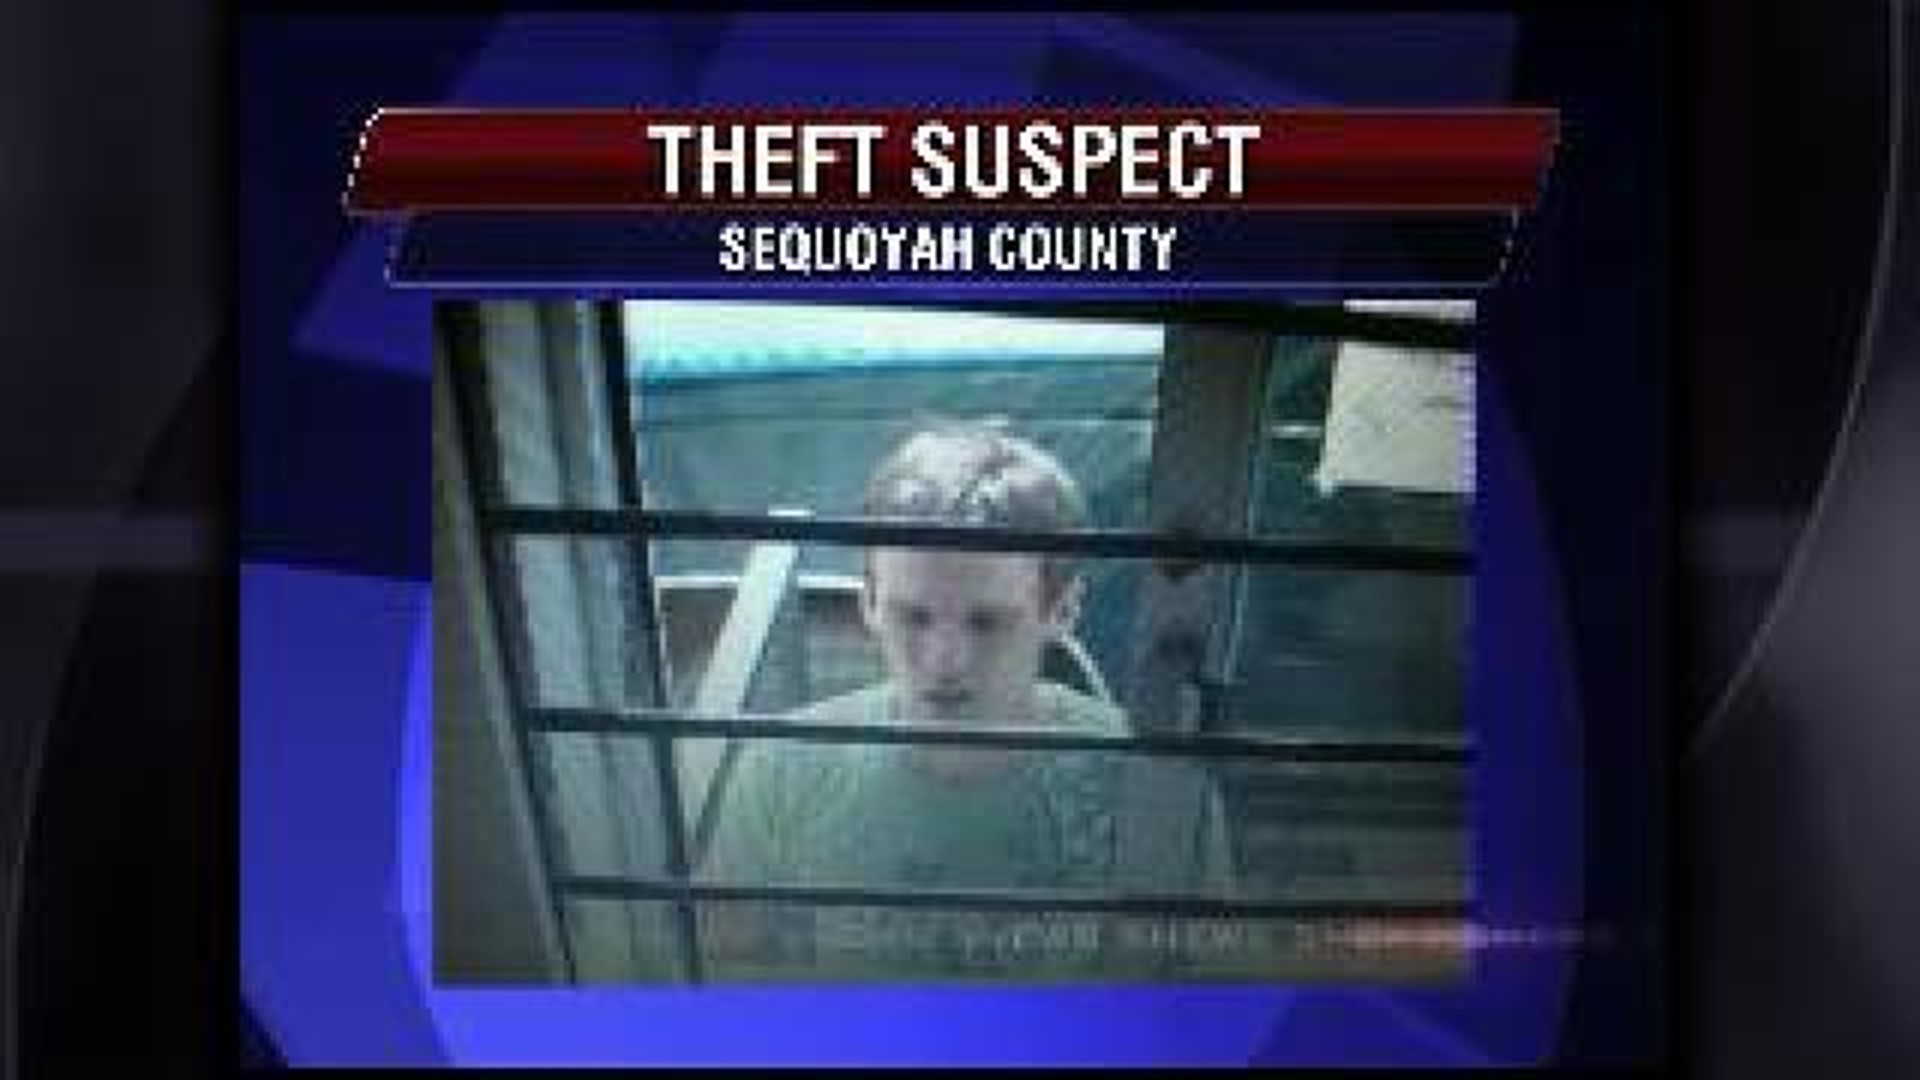 Suspect being sought in eastern Sequoyah County thefts